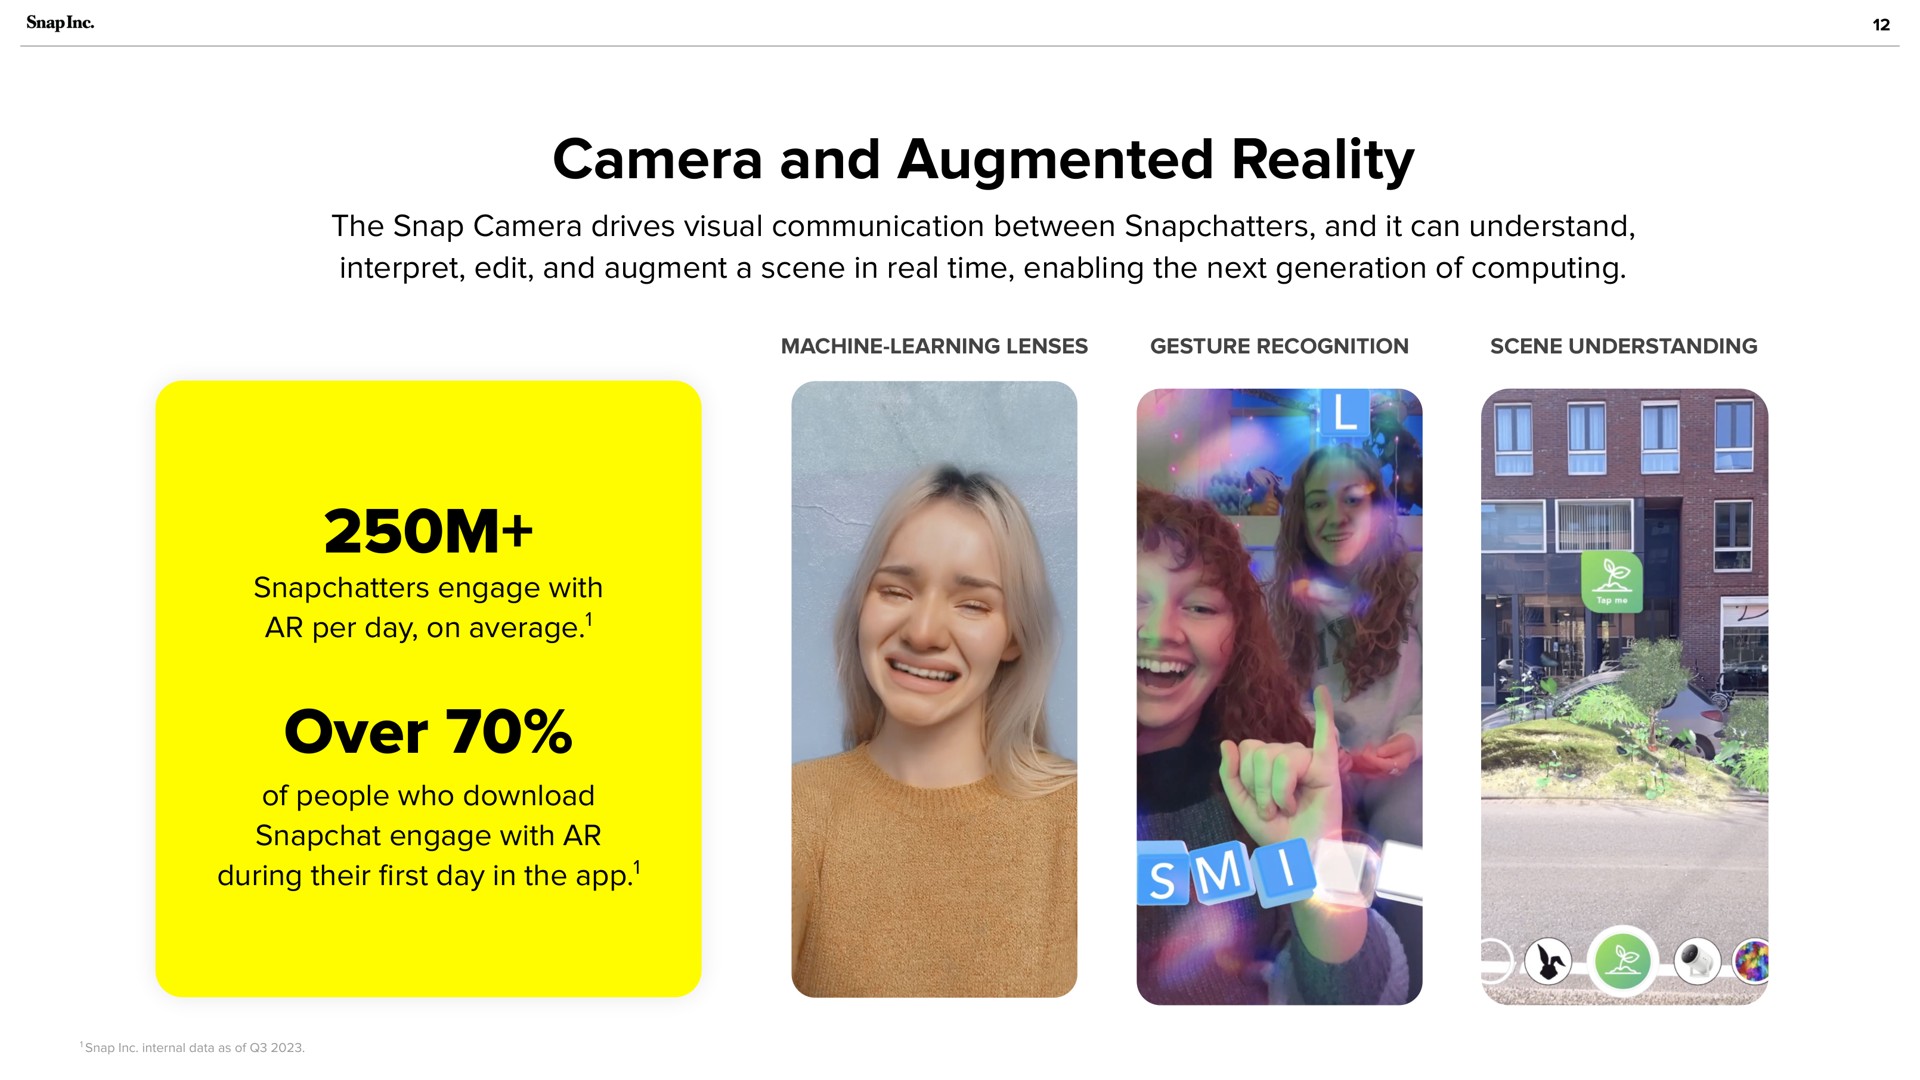 camera and augmented reality over per day on average during their first day in the | Snap Inc